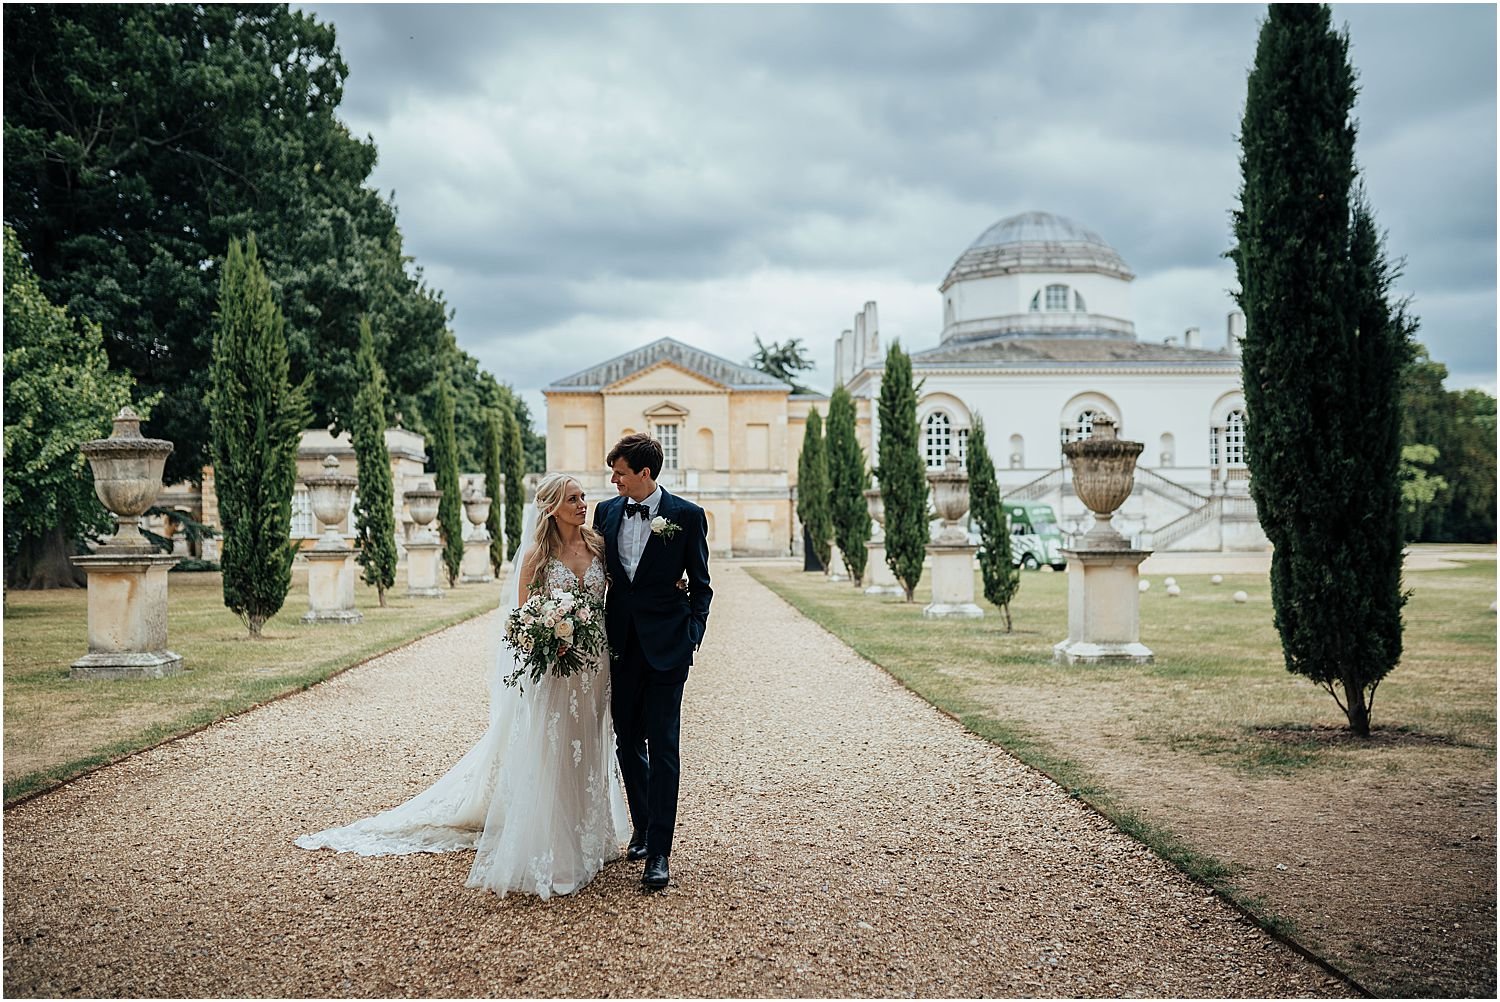 Chiswick House and Gardens wedding photography 